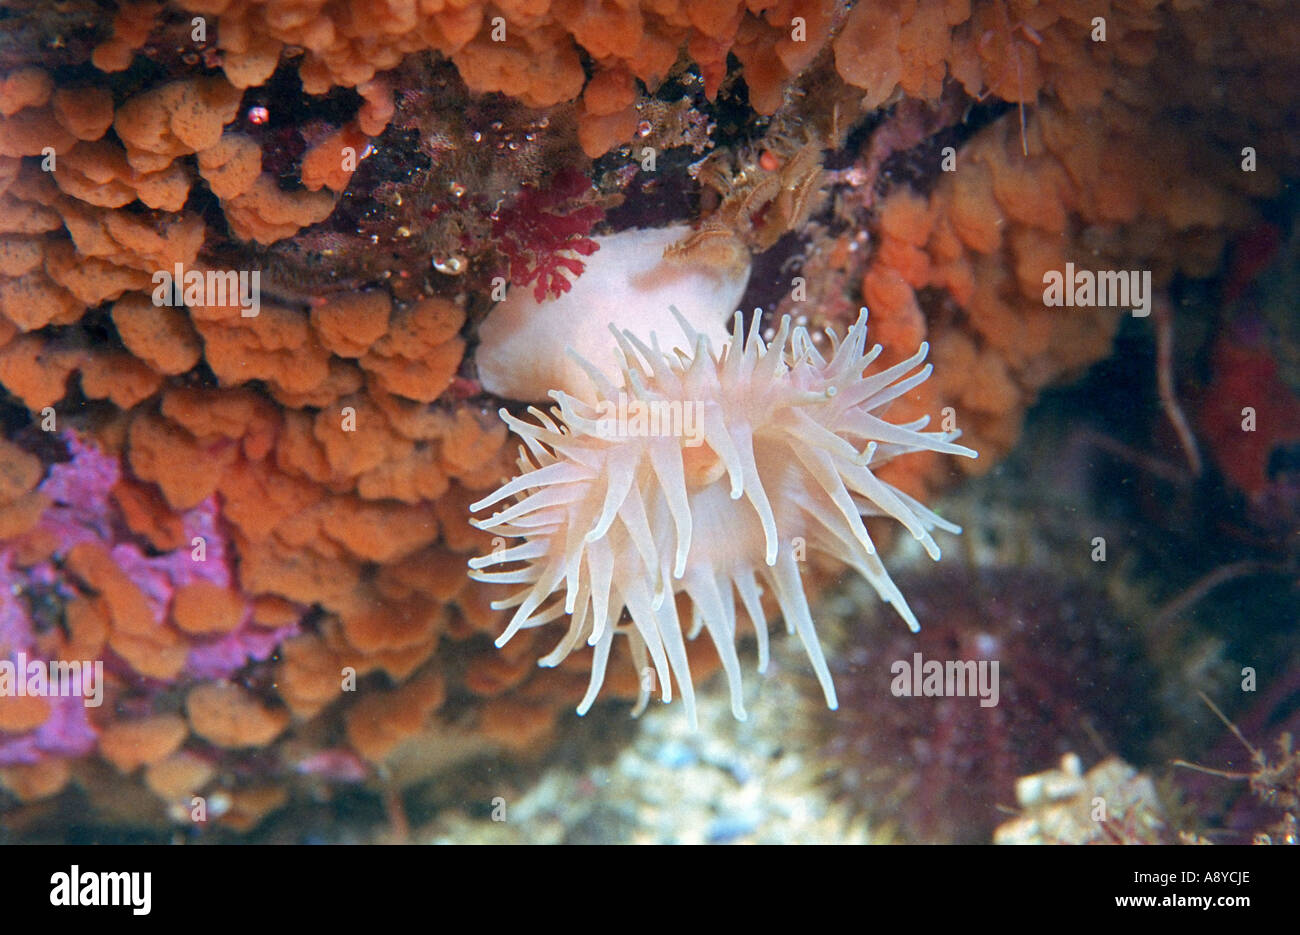 Large pure white sea anemone Actinostola callosa growing on a vertical wall cowered by reddish sponge North Pacific Underwater Stock Photo